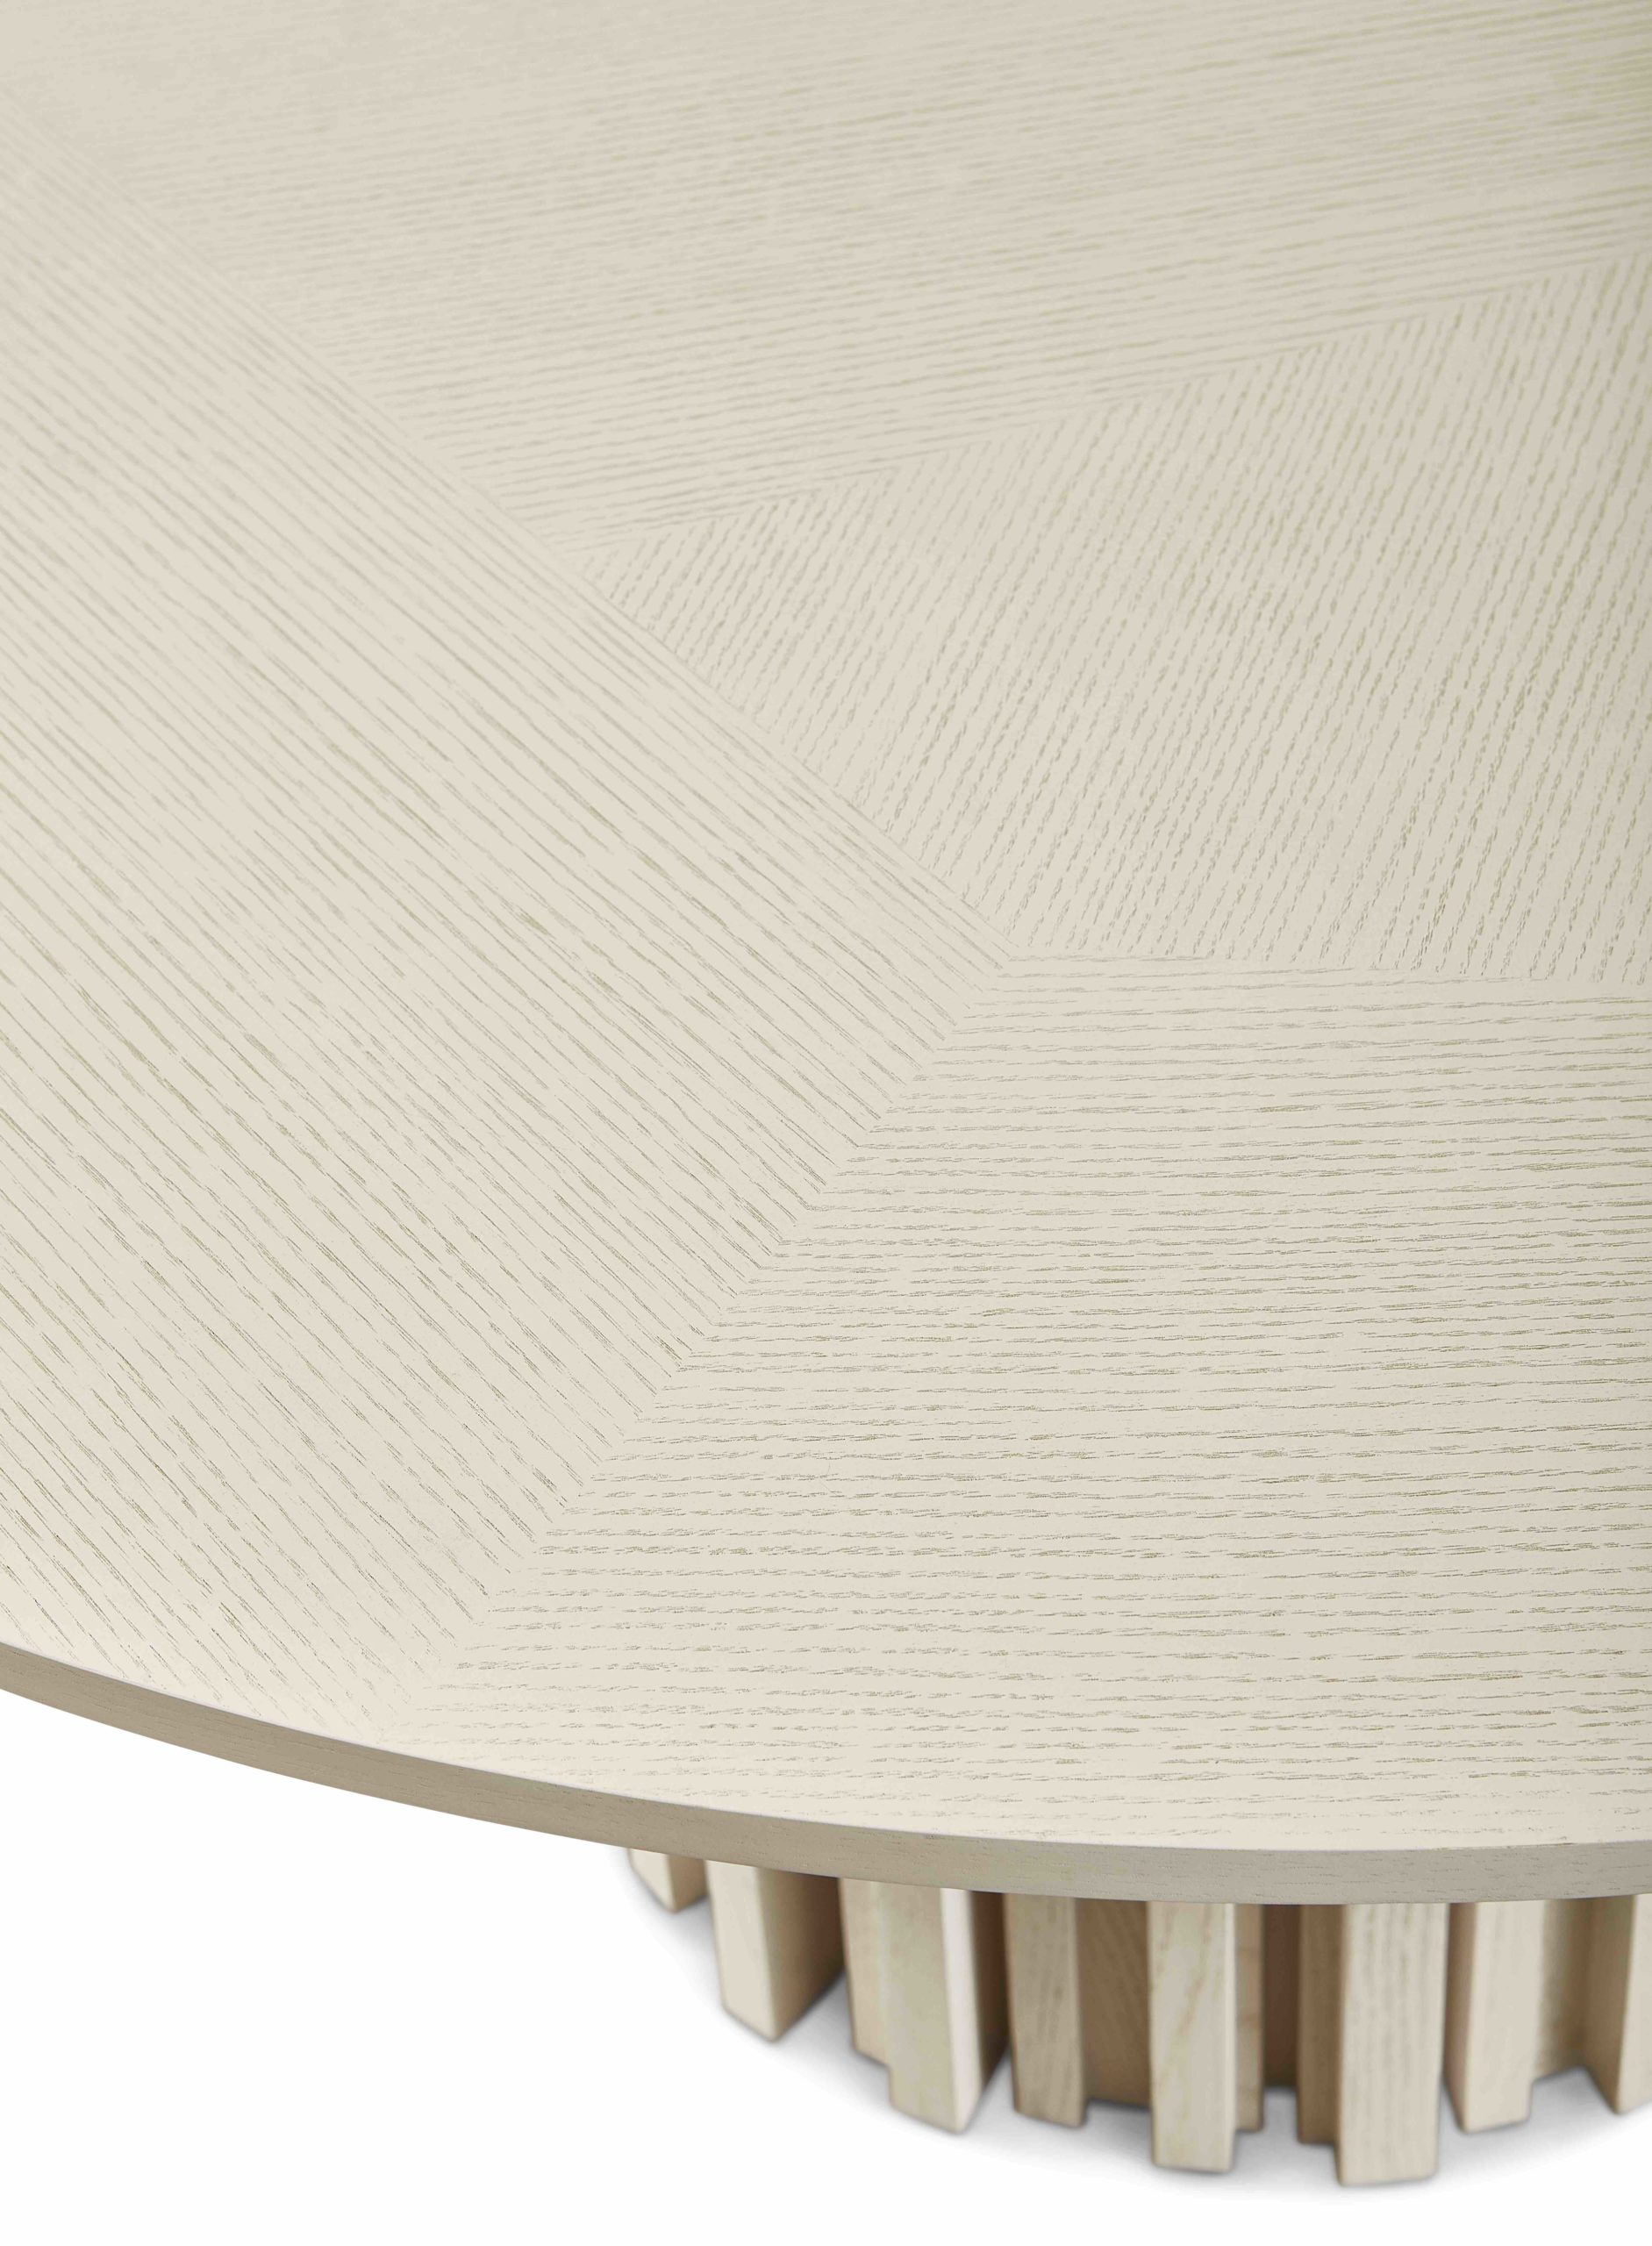 Baker_products_WNWN_huxley_round_dining_table_BAA3054_DETAIL-scaled-6